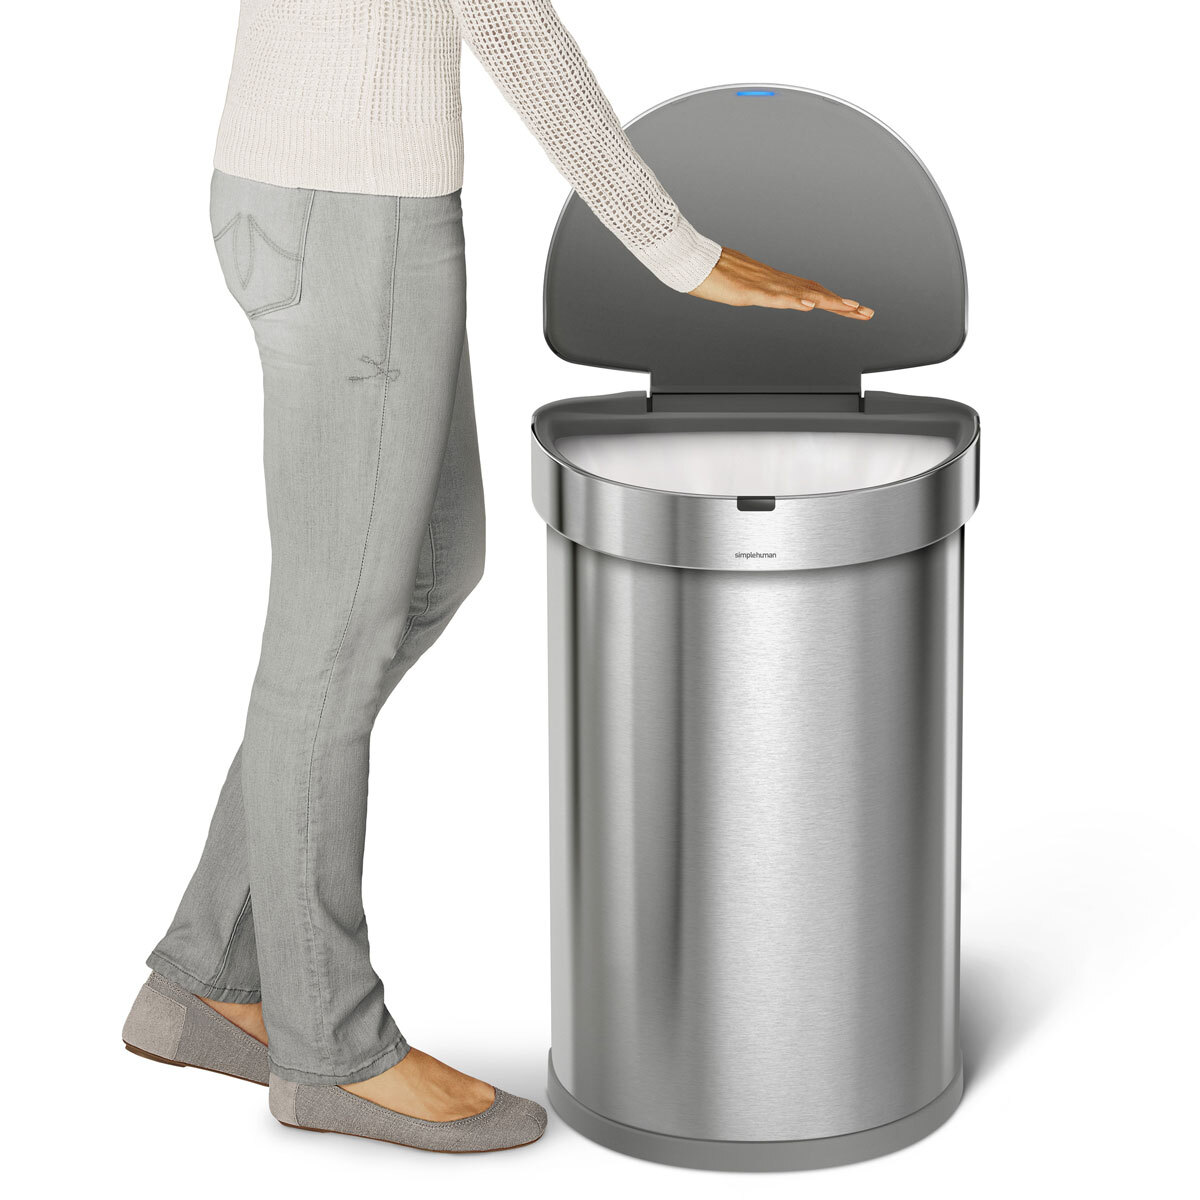 Cut out image of large bin on white background with person opening the lid